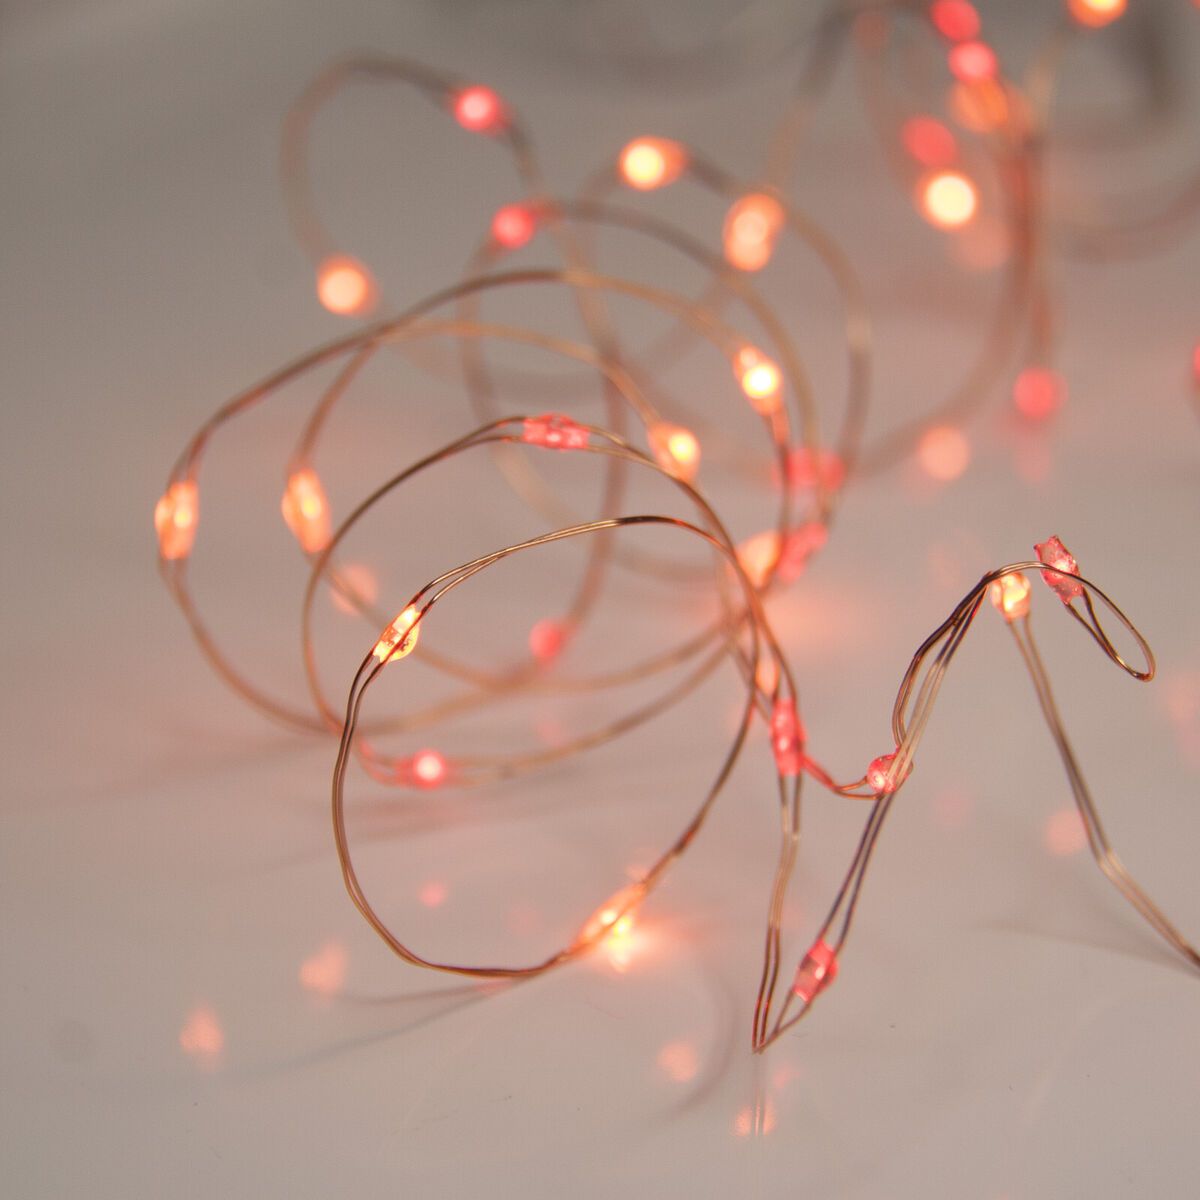 A string of red fairy lights on a white background. - Fairy lights